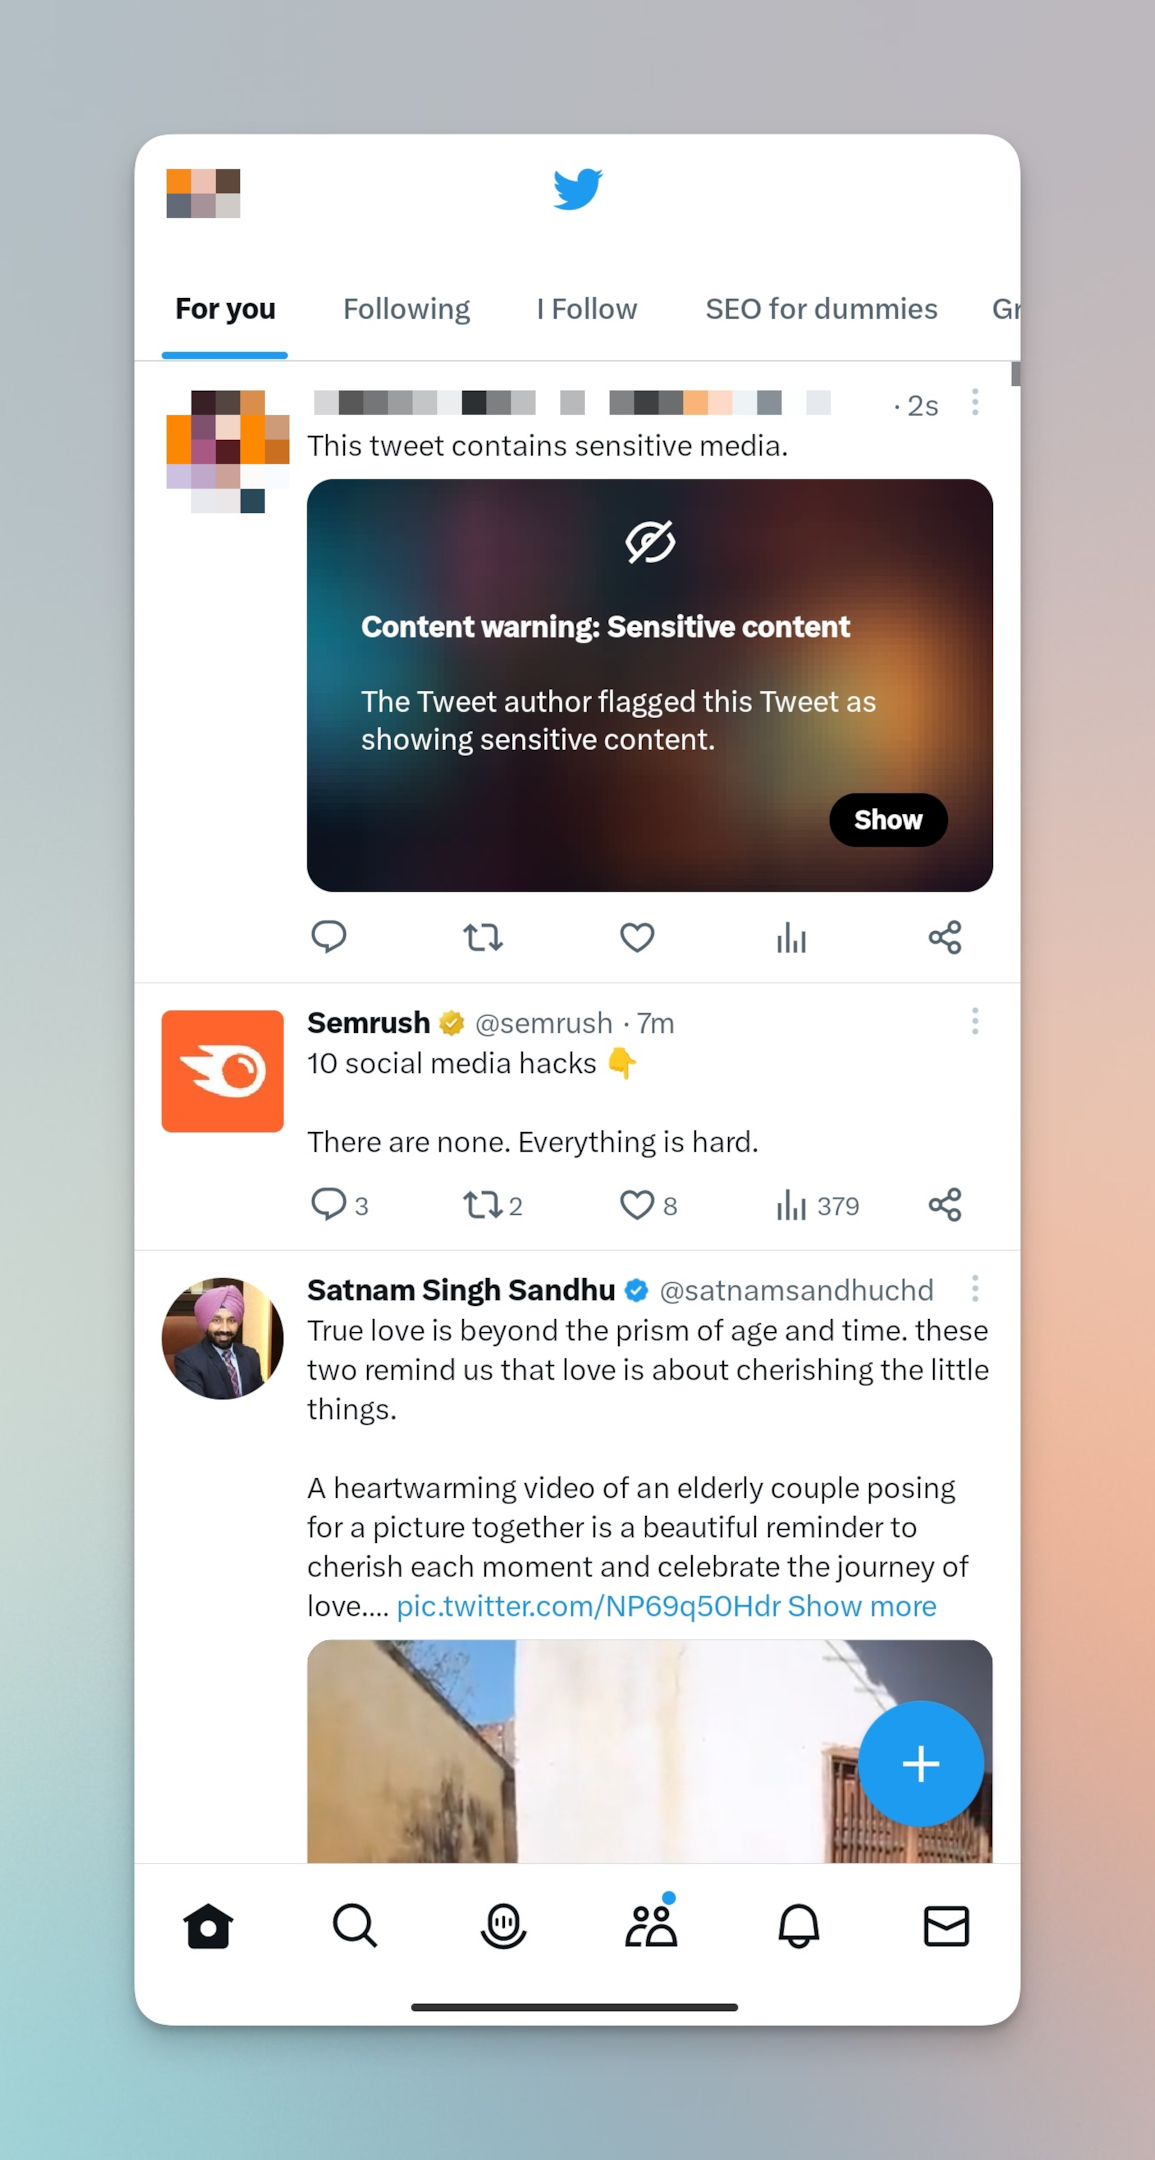 Remote.tools shows a screenshot of a published tweet with sensitive content